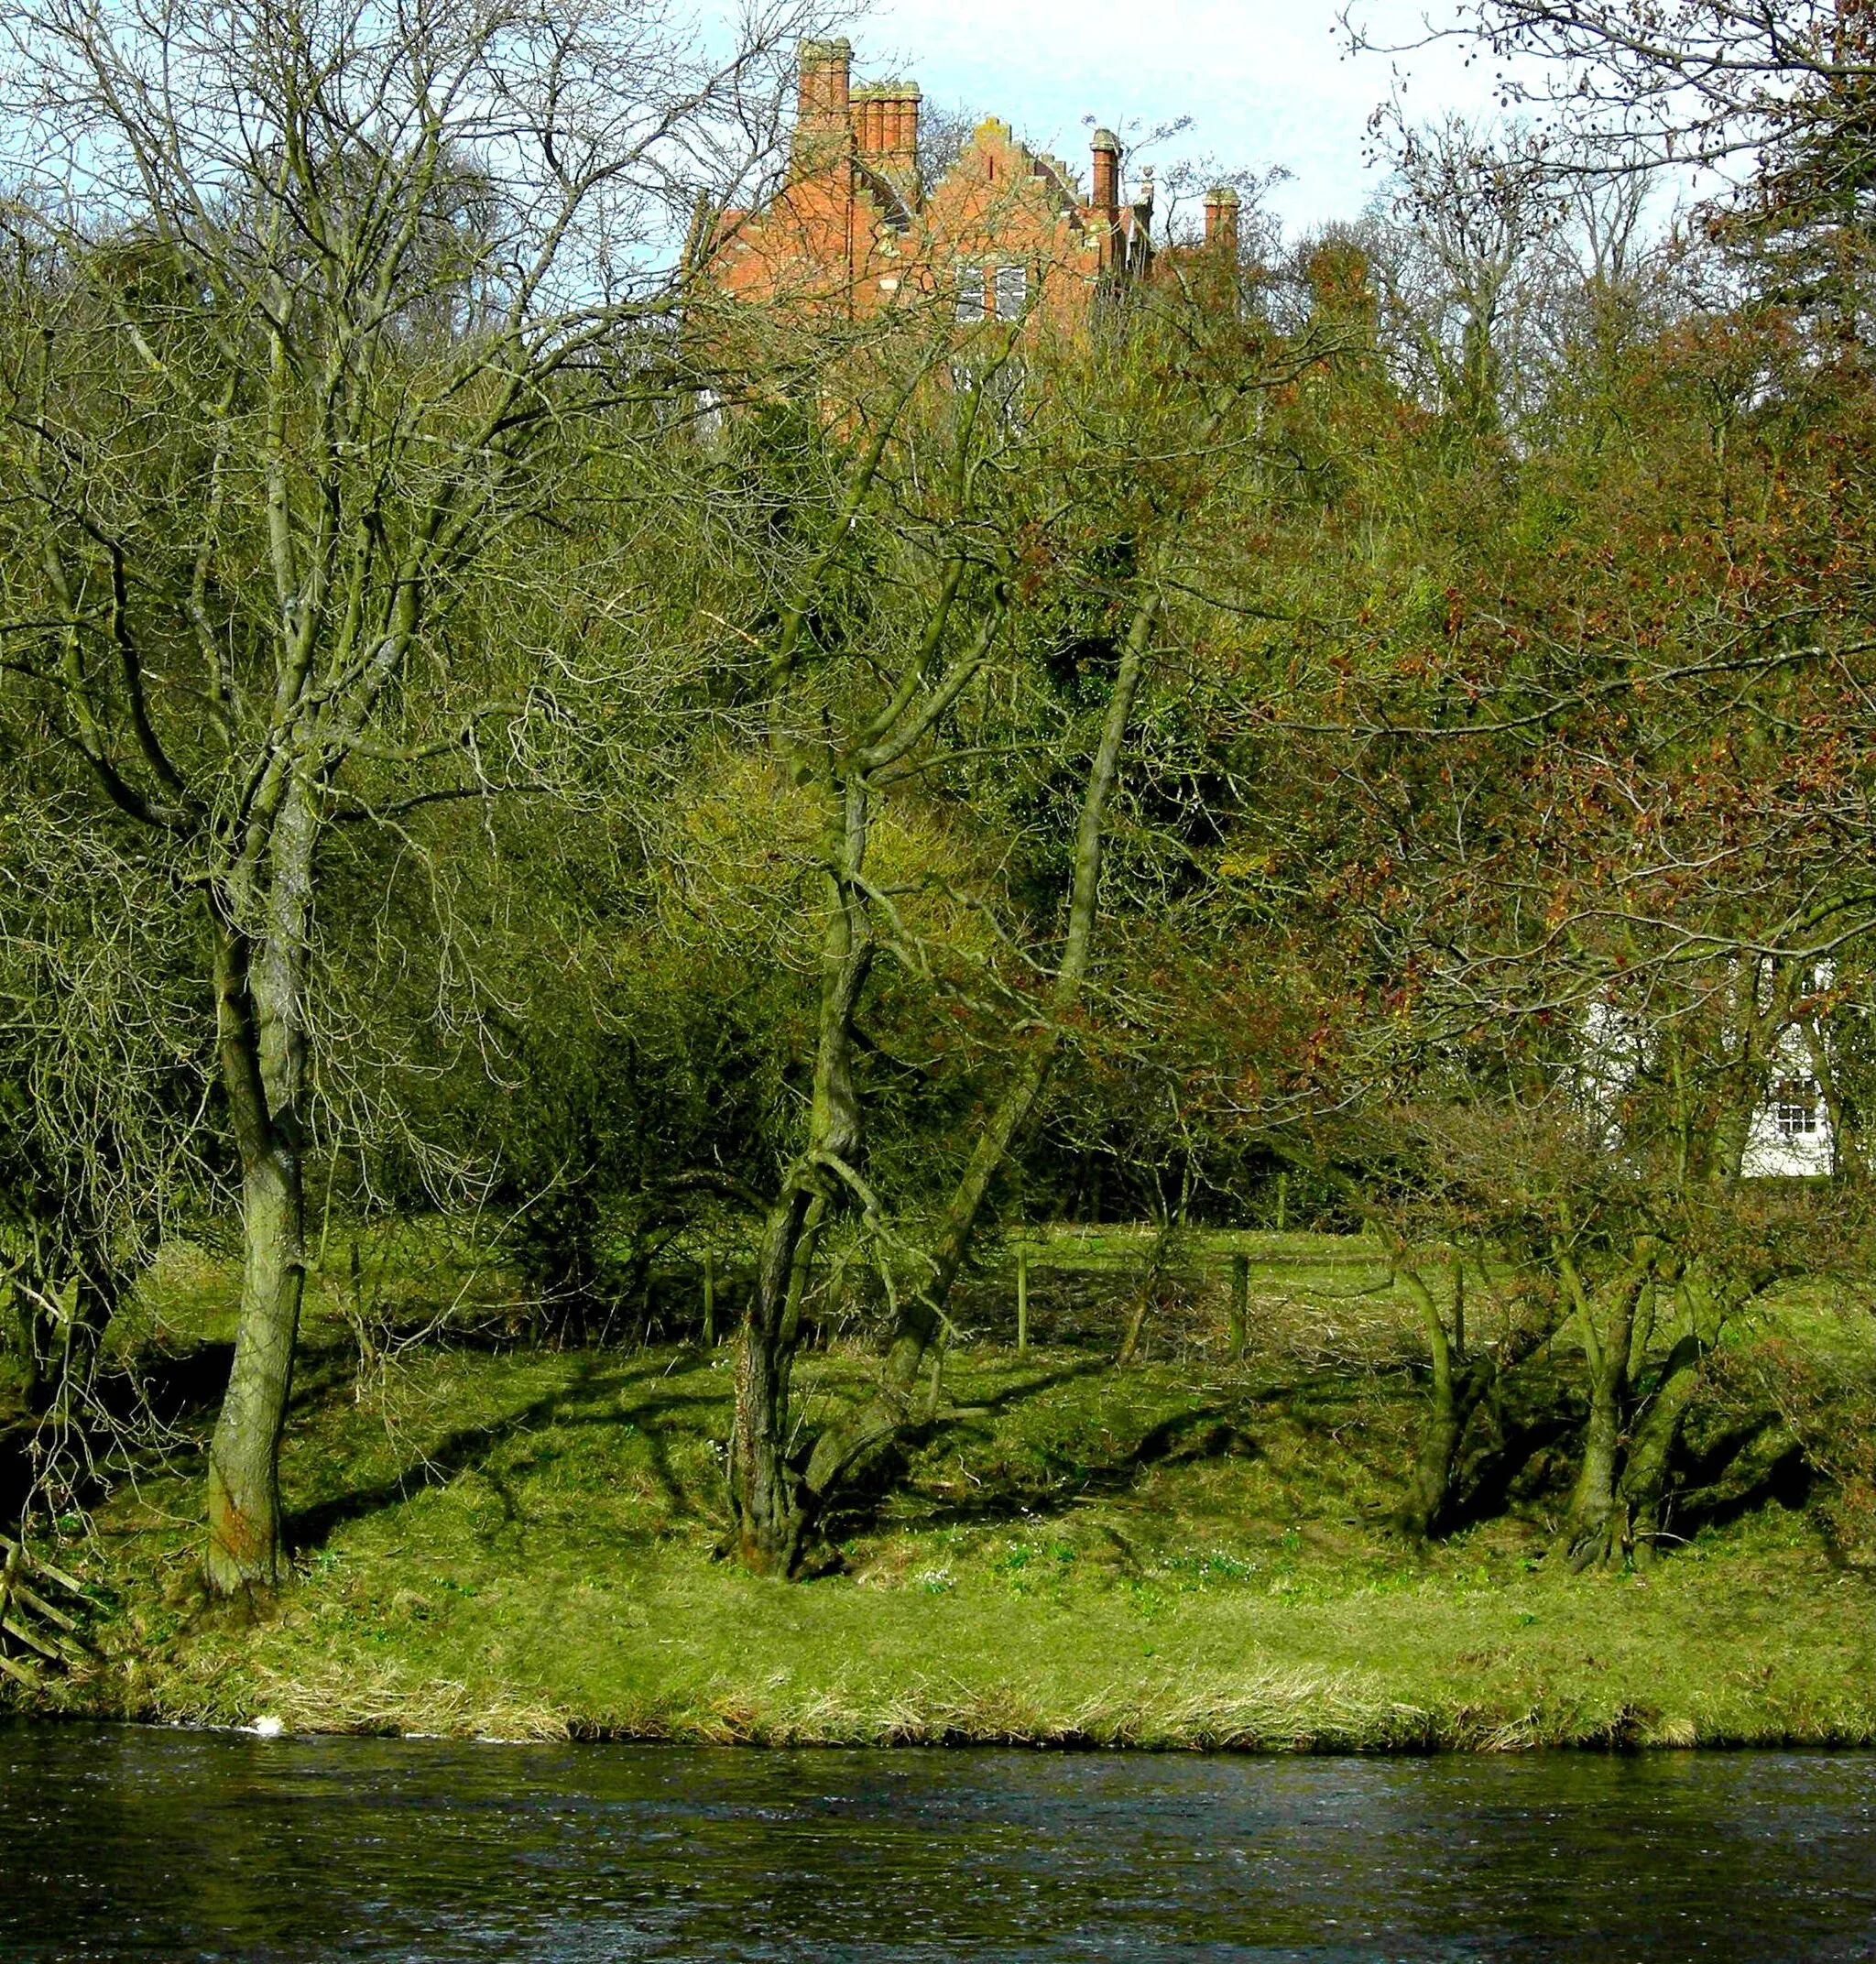 Photo showing: Carlbury Hill, Carlbury, County Durham, from south bank of River Tees.  Carlbury Hall can be seen on the hill. In 1642 an English Civil War battle was won by the Royalists because they used this hill as a battery emplacement, which gave them the advantage over the Parliamentarians attempting to cross the river.